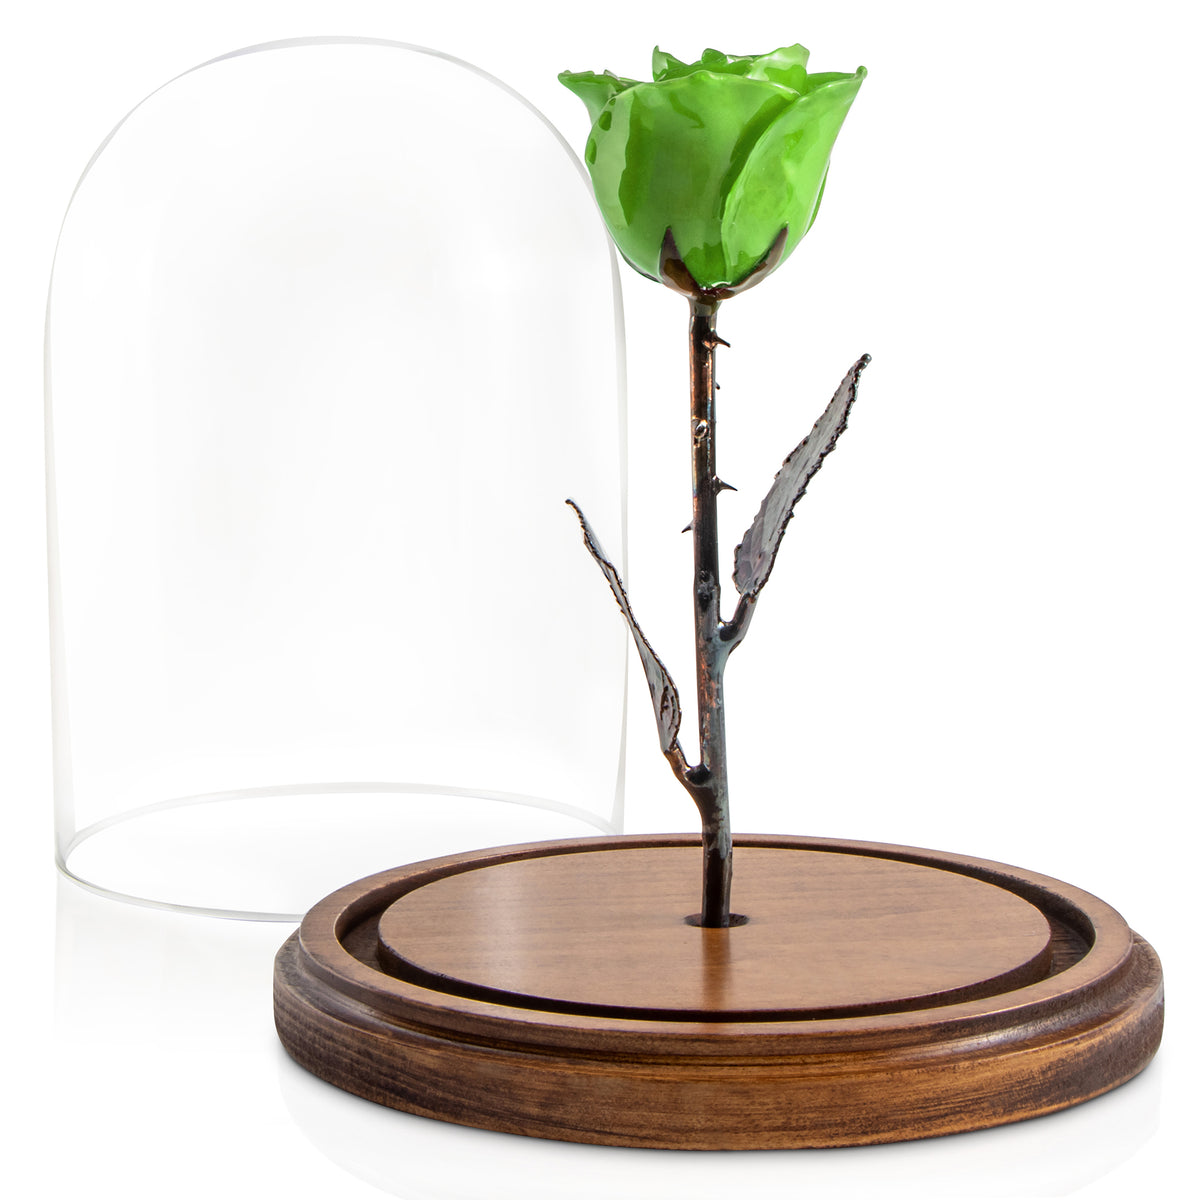 Green Enchanted Rose (aka Beauty &amp; The Beast Rose) with Patina Copper Stem Mounted to A Hand Turned Solid Wood Base under a glass dome. Shown with the dome off.